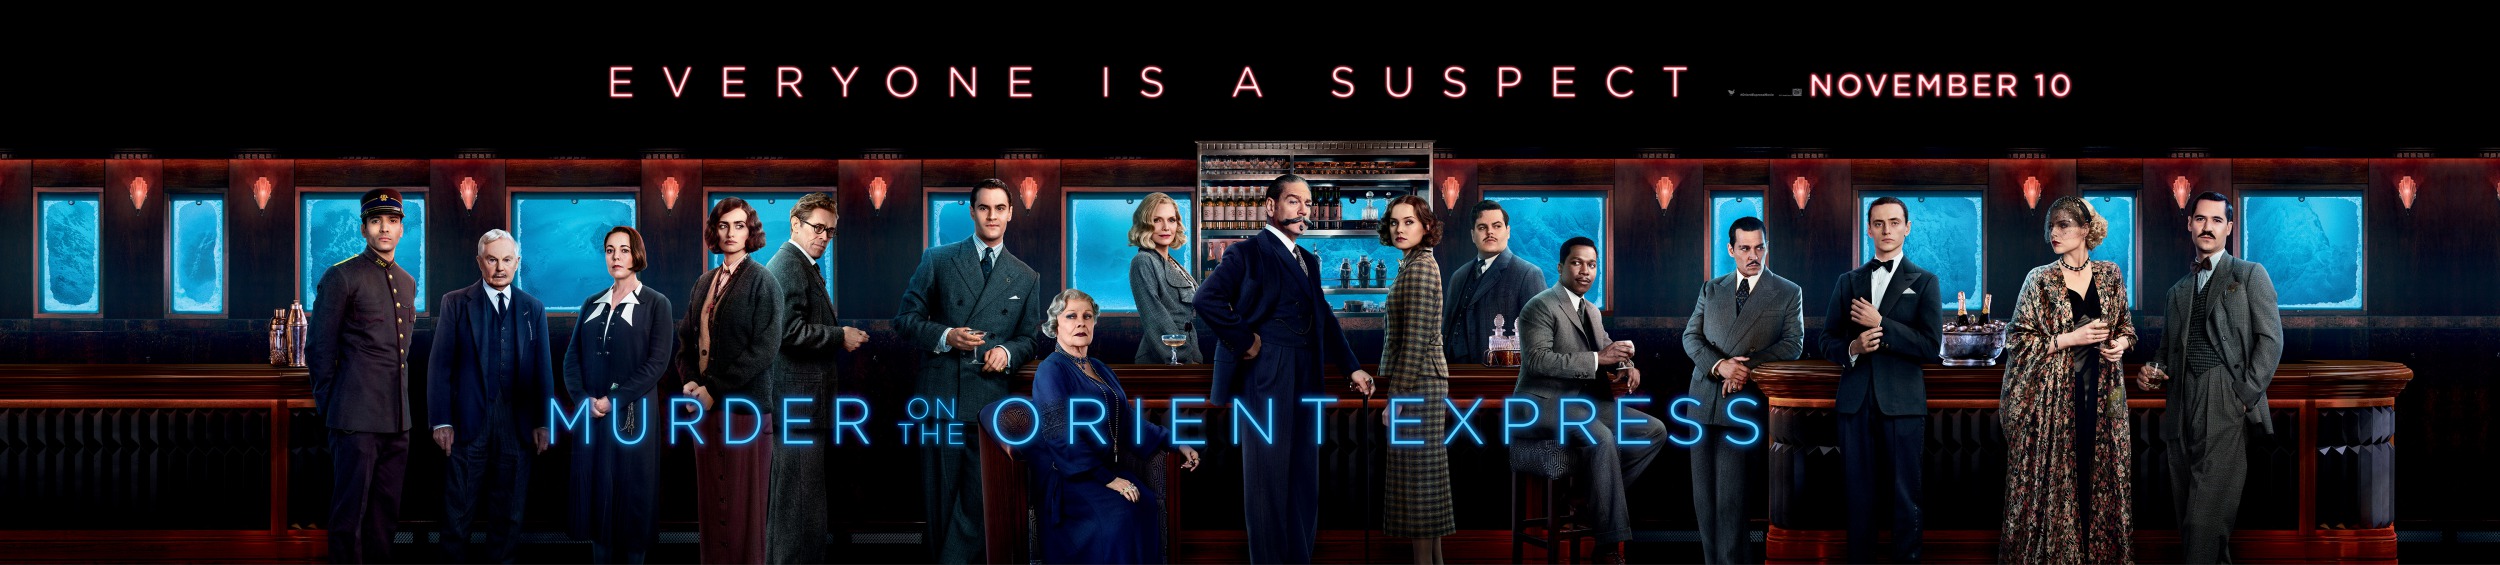 Mega Sized Movie Poster Image for Murder on the Orient Express (#21 of 40)